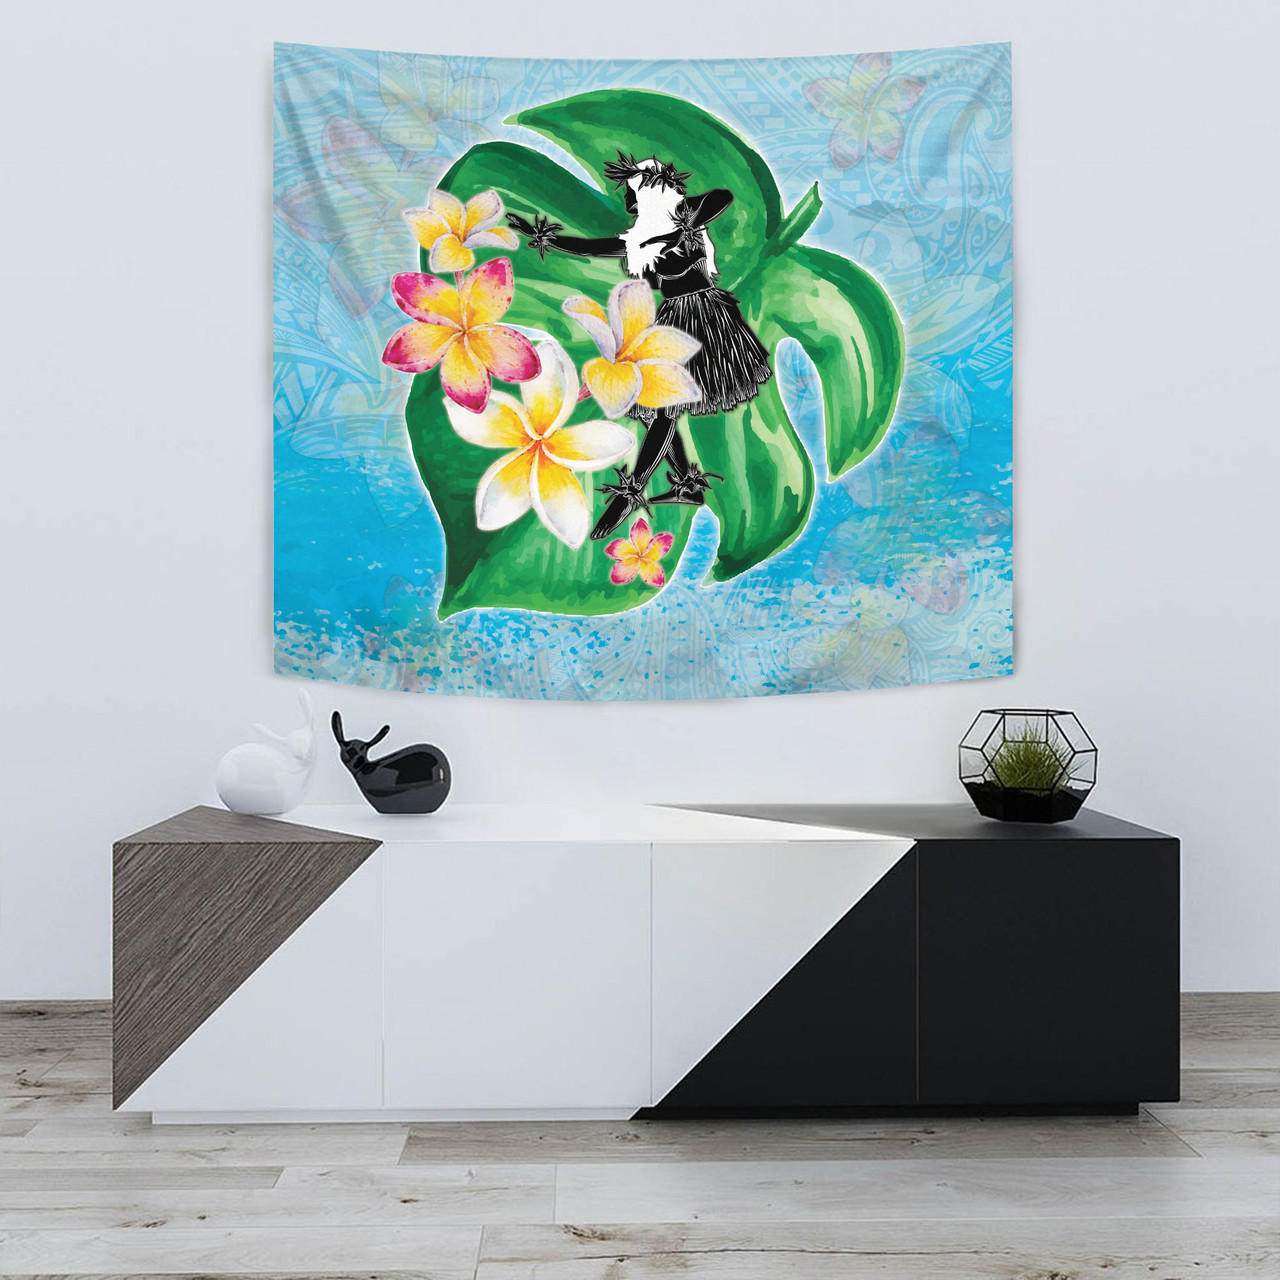 Hawaii Tapestry Hula Girls With Tropical Flowers Polynesian Style